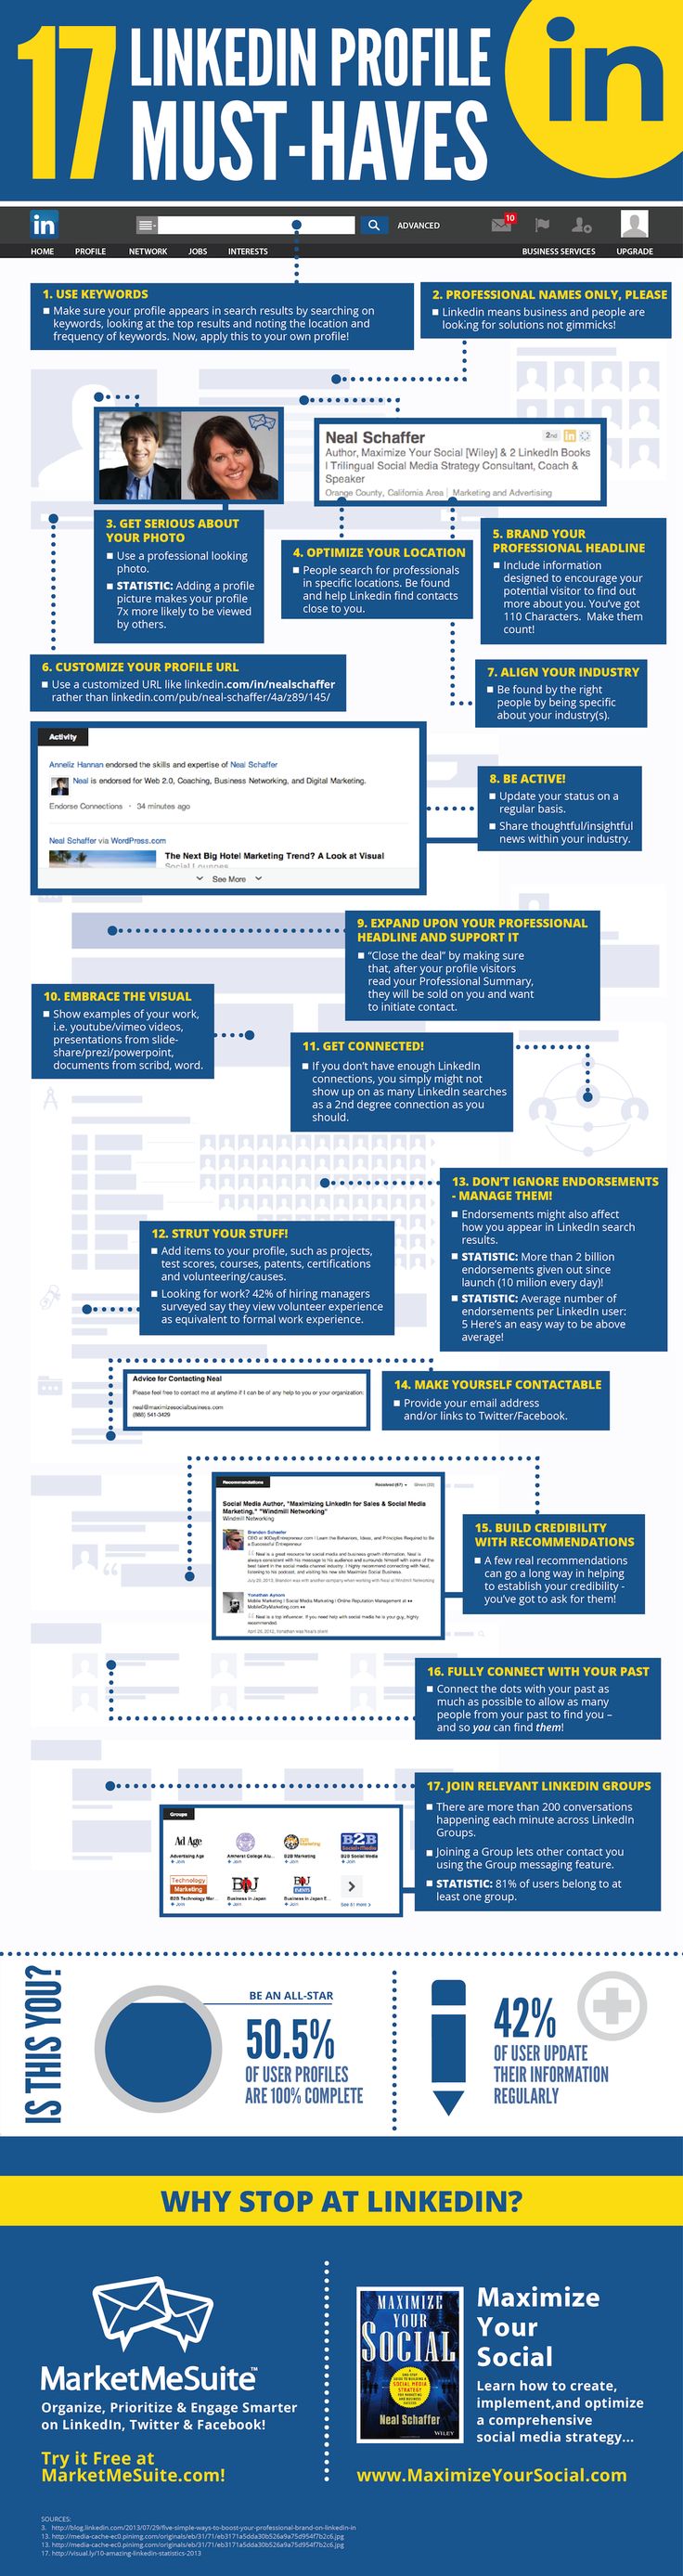 Infographic: 17 LinkedIn Profile Must-haves